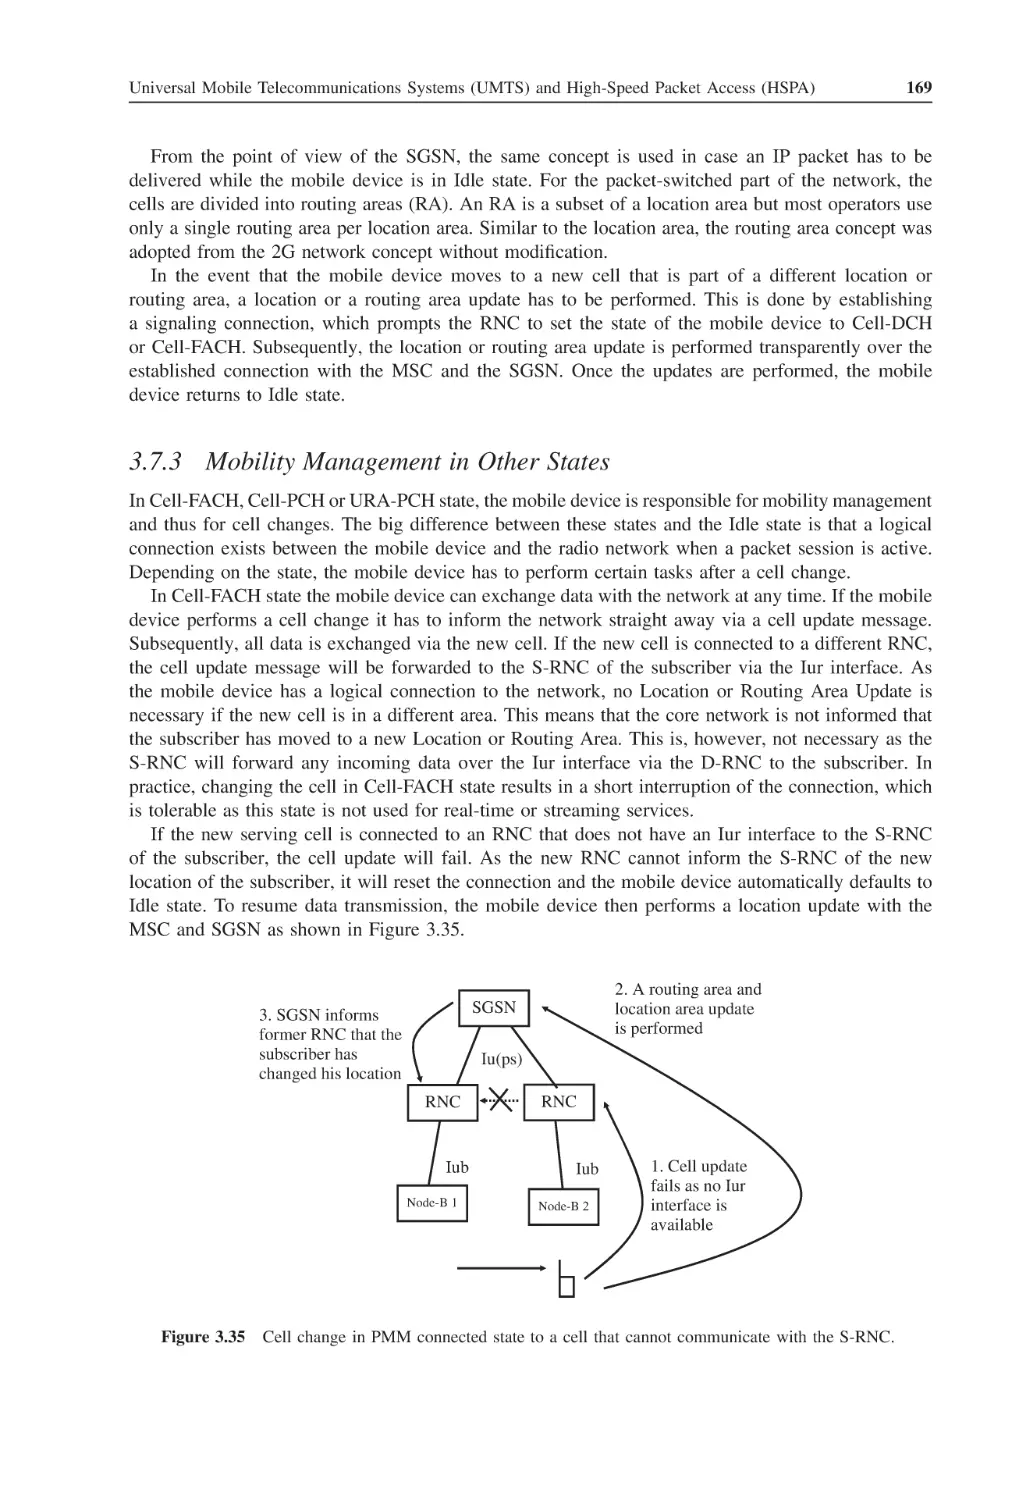 3.7.3 Mobility Management in Other States